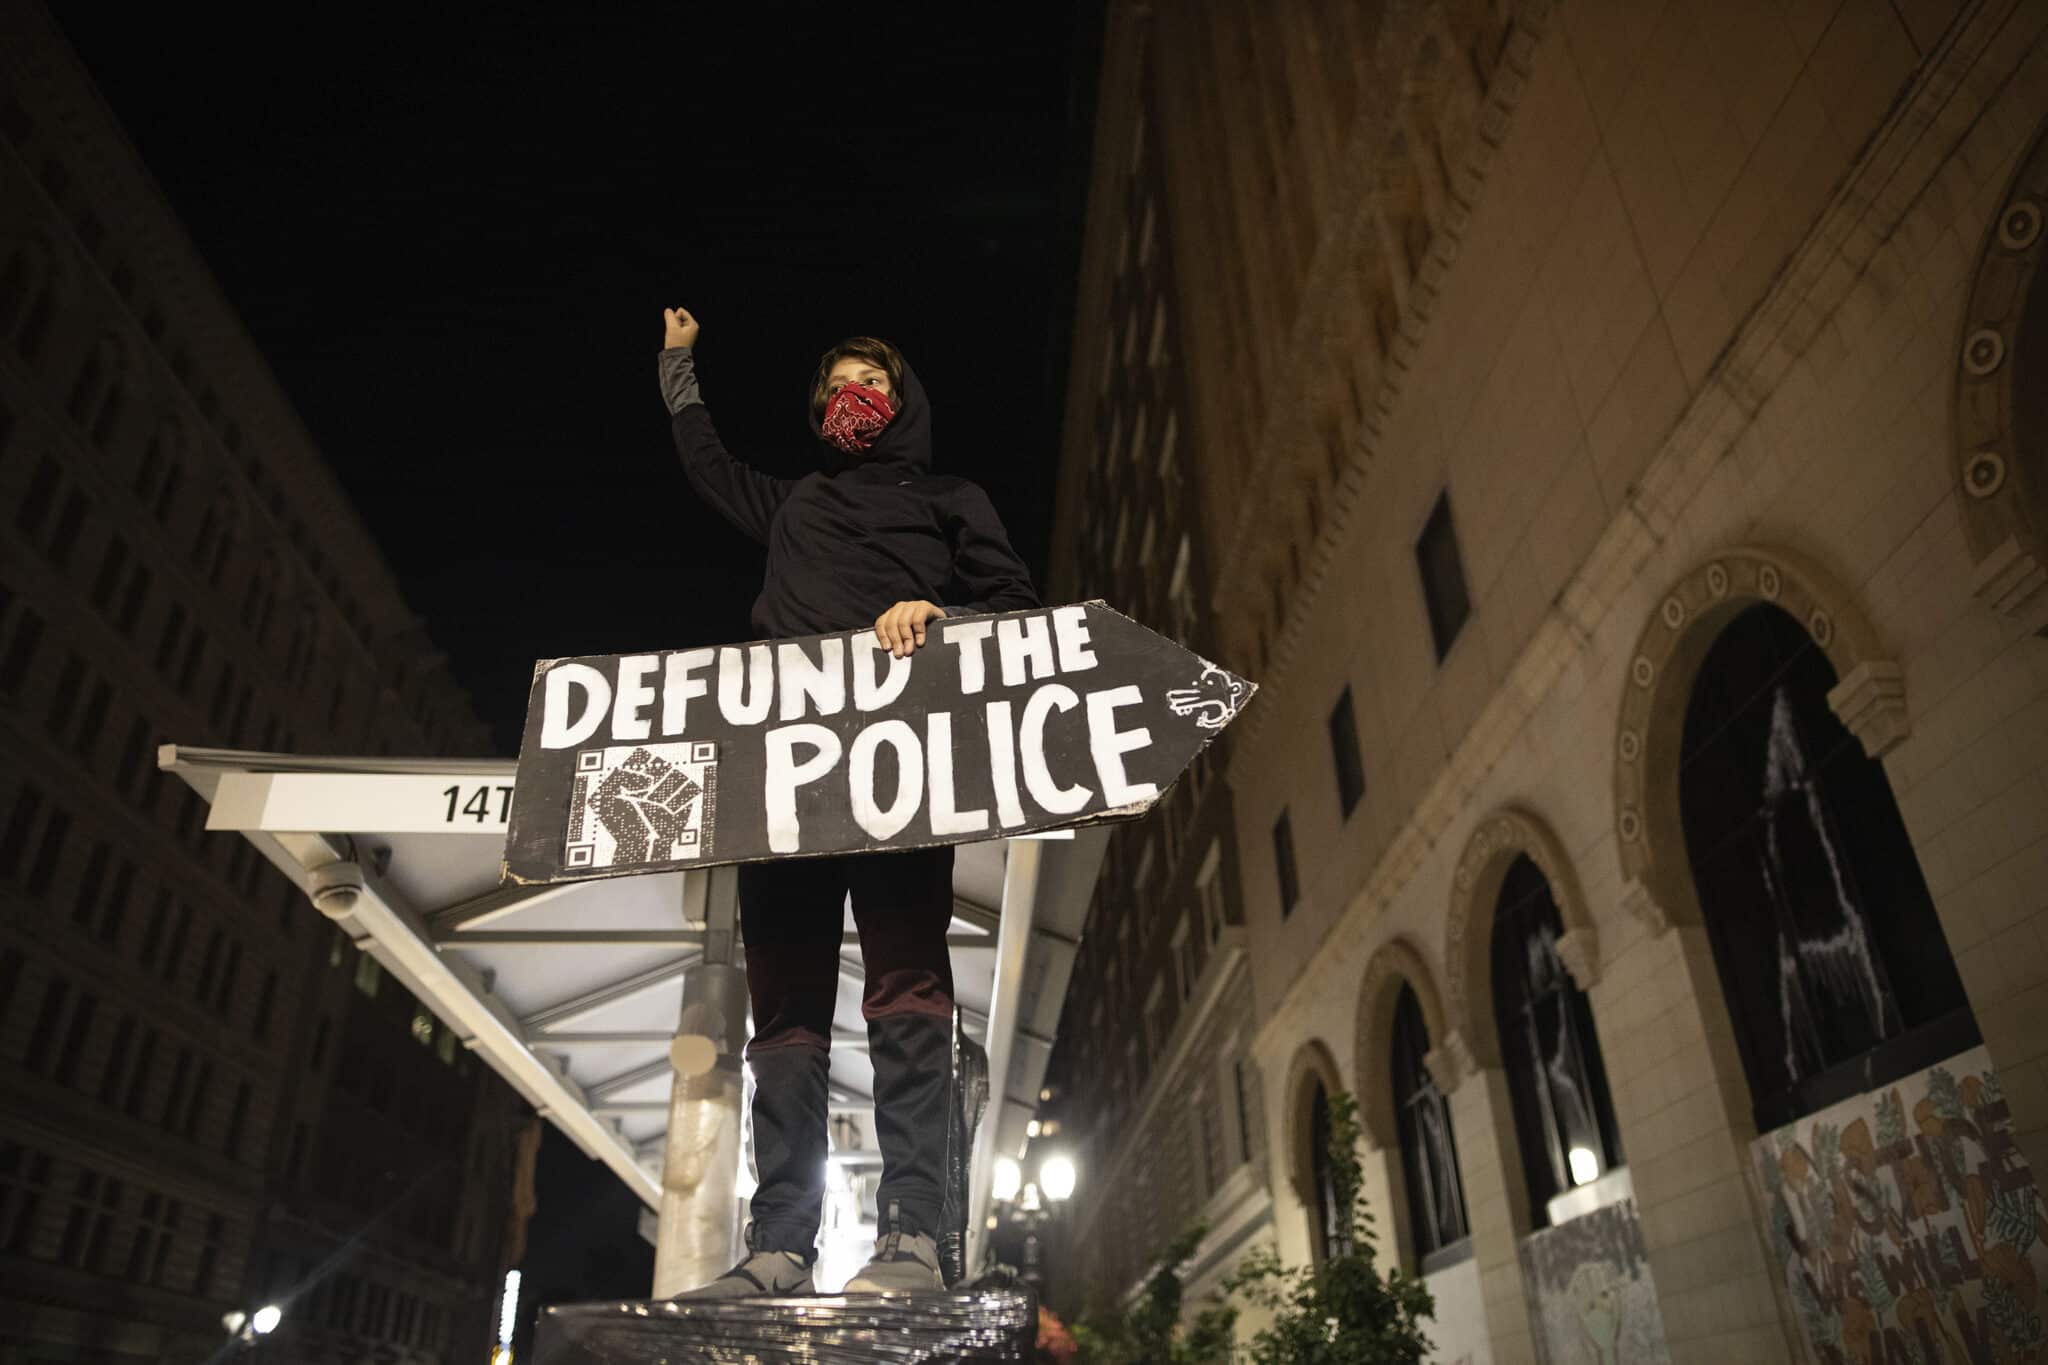 FILE - A protester holds a sign calling for the defunding of police at a protest on July 25, 2020, in Oakland, Calif. Oakland officials will reverse plans to cut police funding and seek to hire more officers as soon as possible, Mayor Libby Schaaf said Monday, Nov. 29, 2021, as a spate of gun violence and fatal shootings has left residents on edge. (AP Photo/Christian Monterrosa, File)